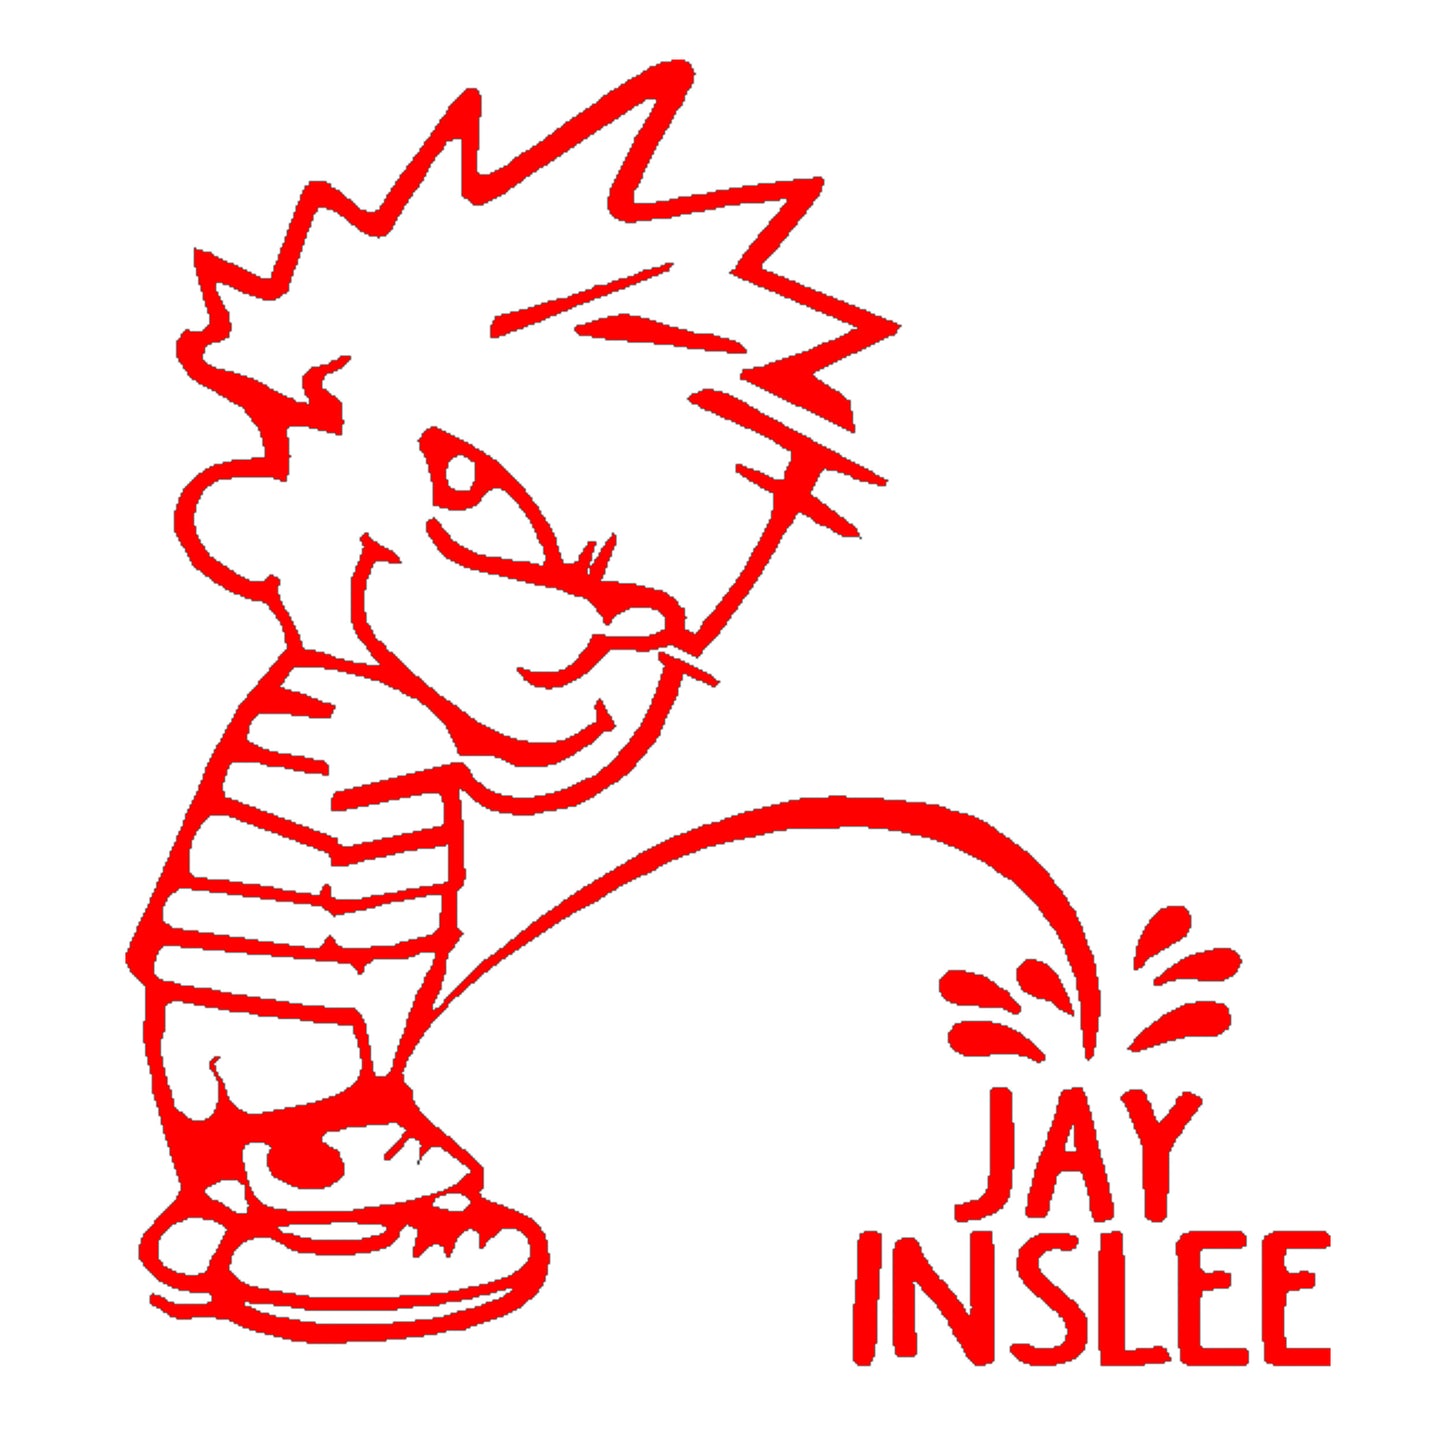 Calvin Peeing On Jay Inslee Decal, Calvin Peeing On Government Sticker, H 6 by L 6 Inches